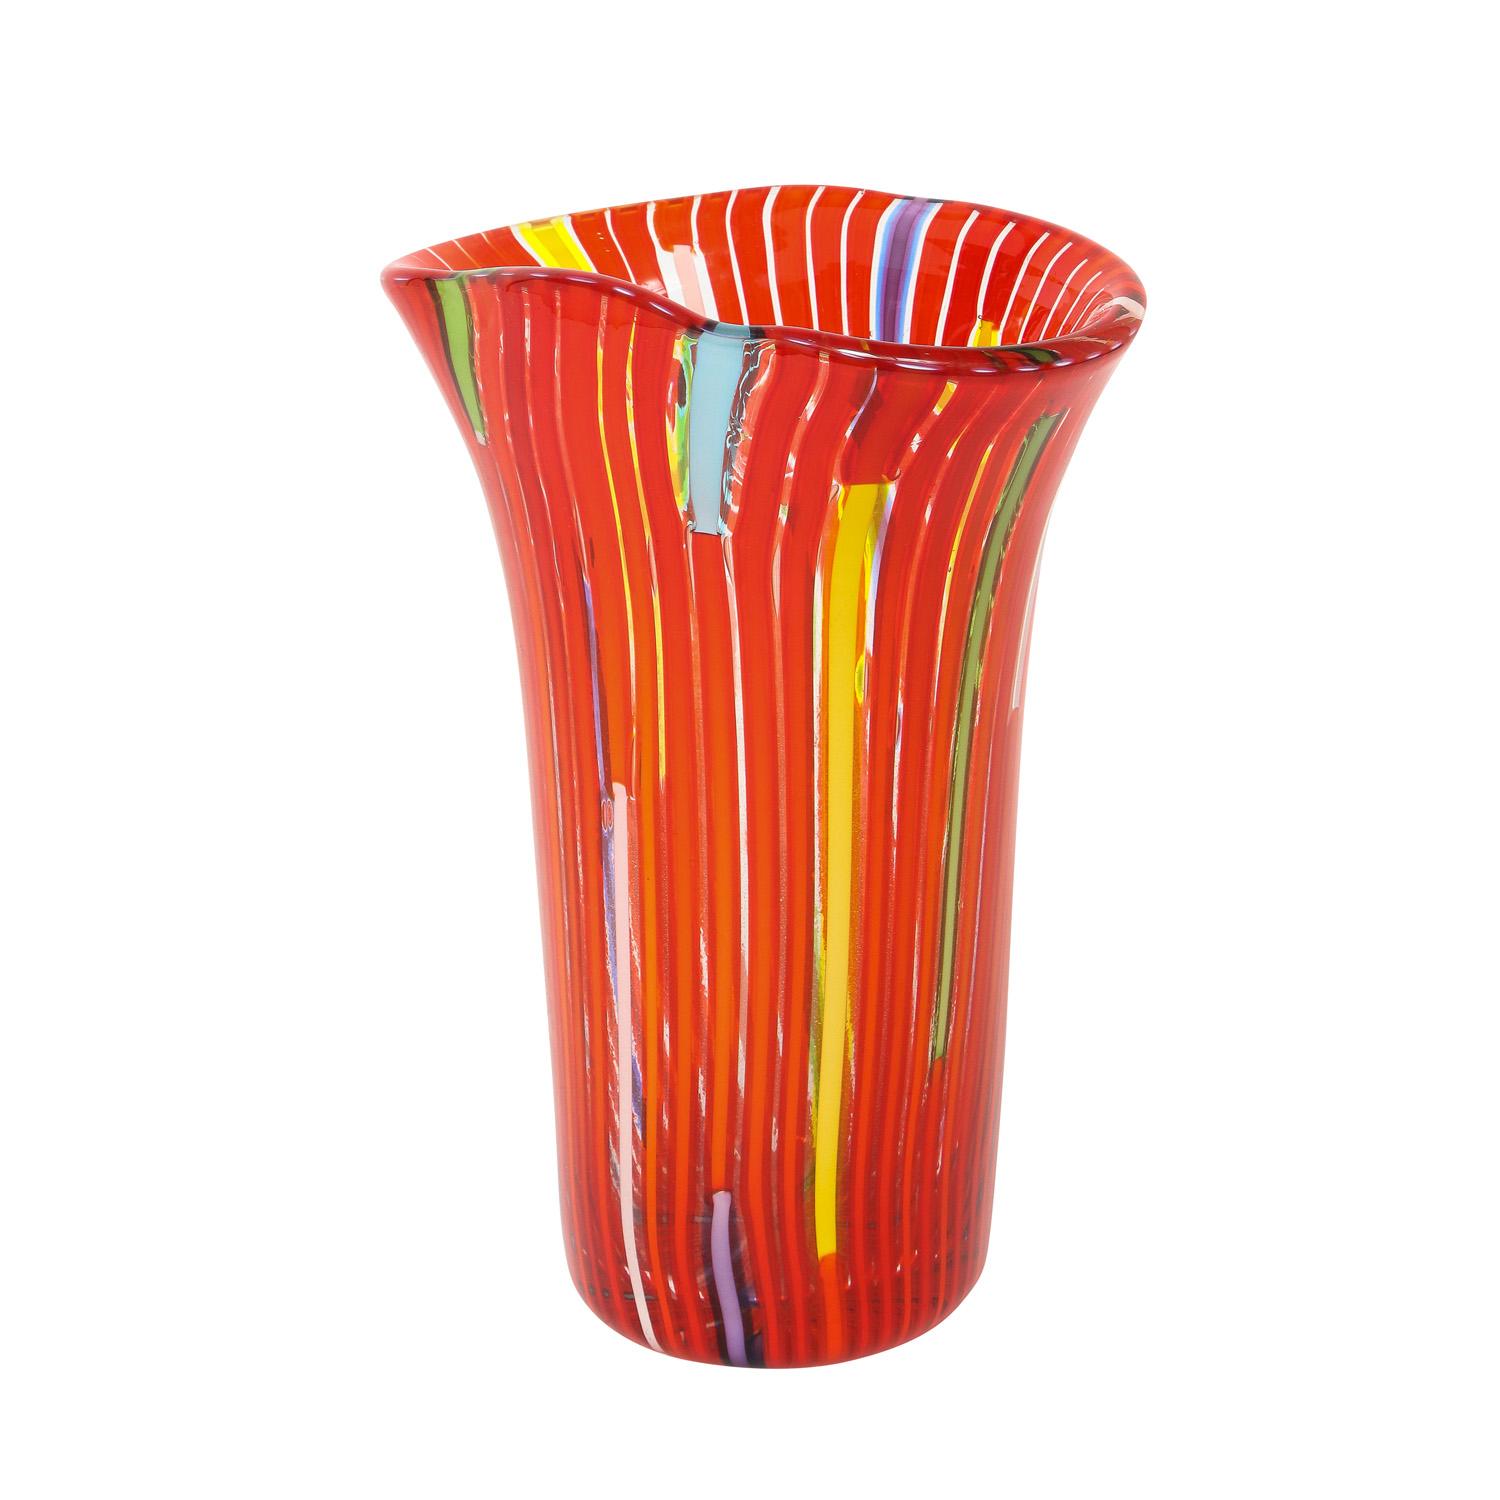 Hand-blown glass vase with multicolor vertical rods by Anzolo Fuga for AVEM (Arte Vetraria Muranese), Murano Italy, 1955-6. The clear and colorful rods interspersed among the red on white rods creates a very striking design. 

Literature: 
Anzolo